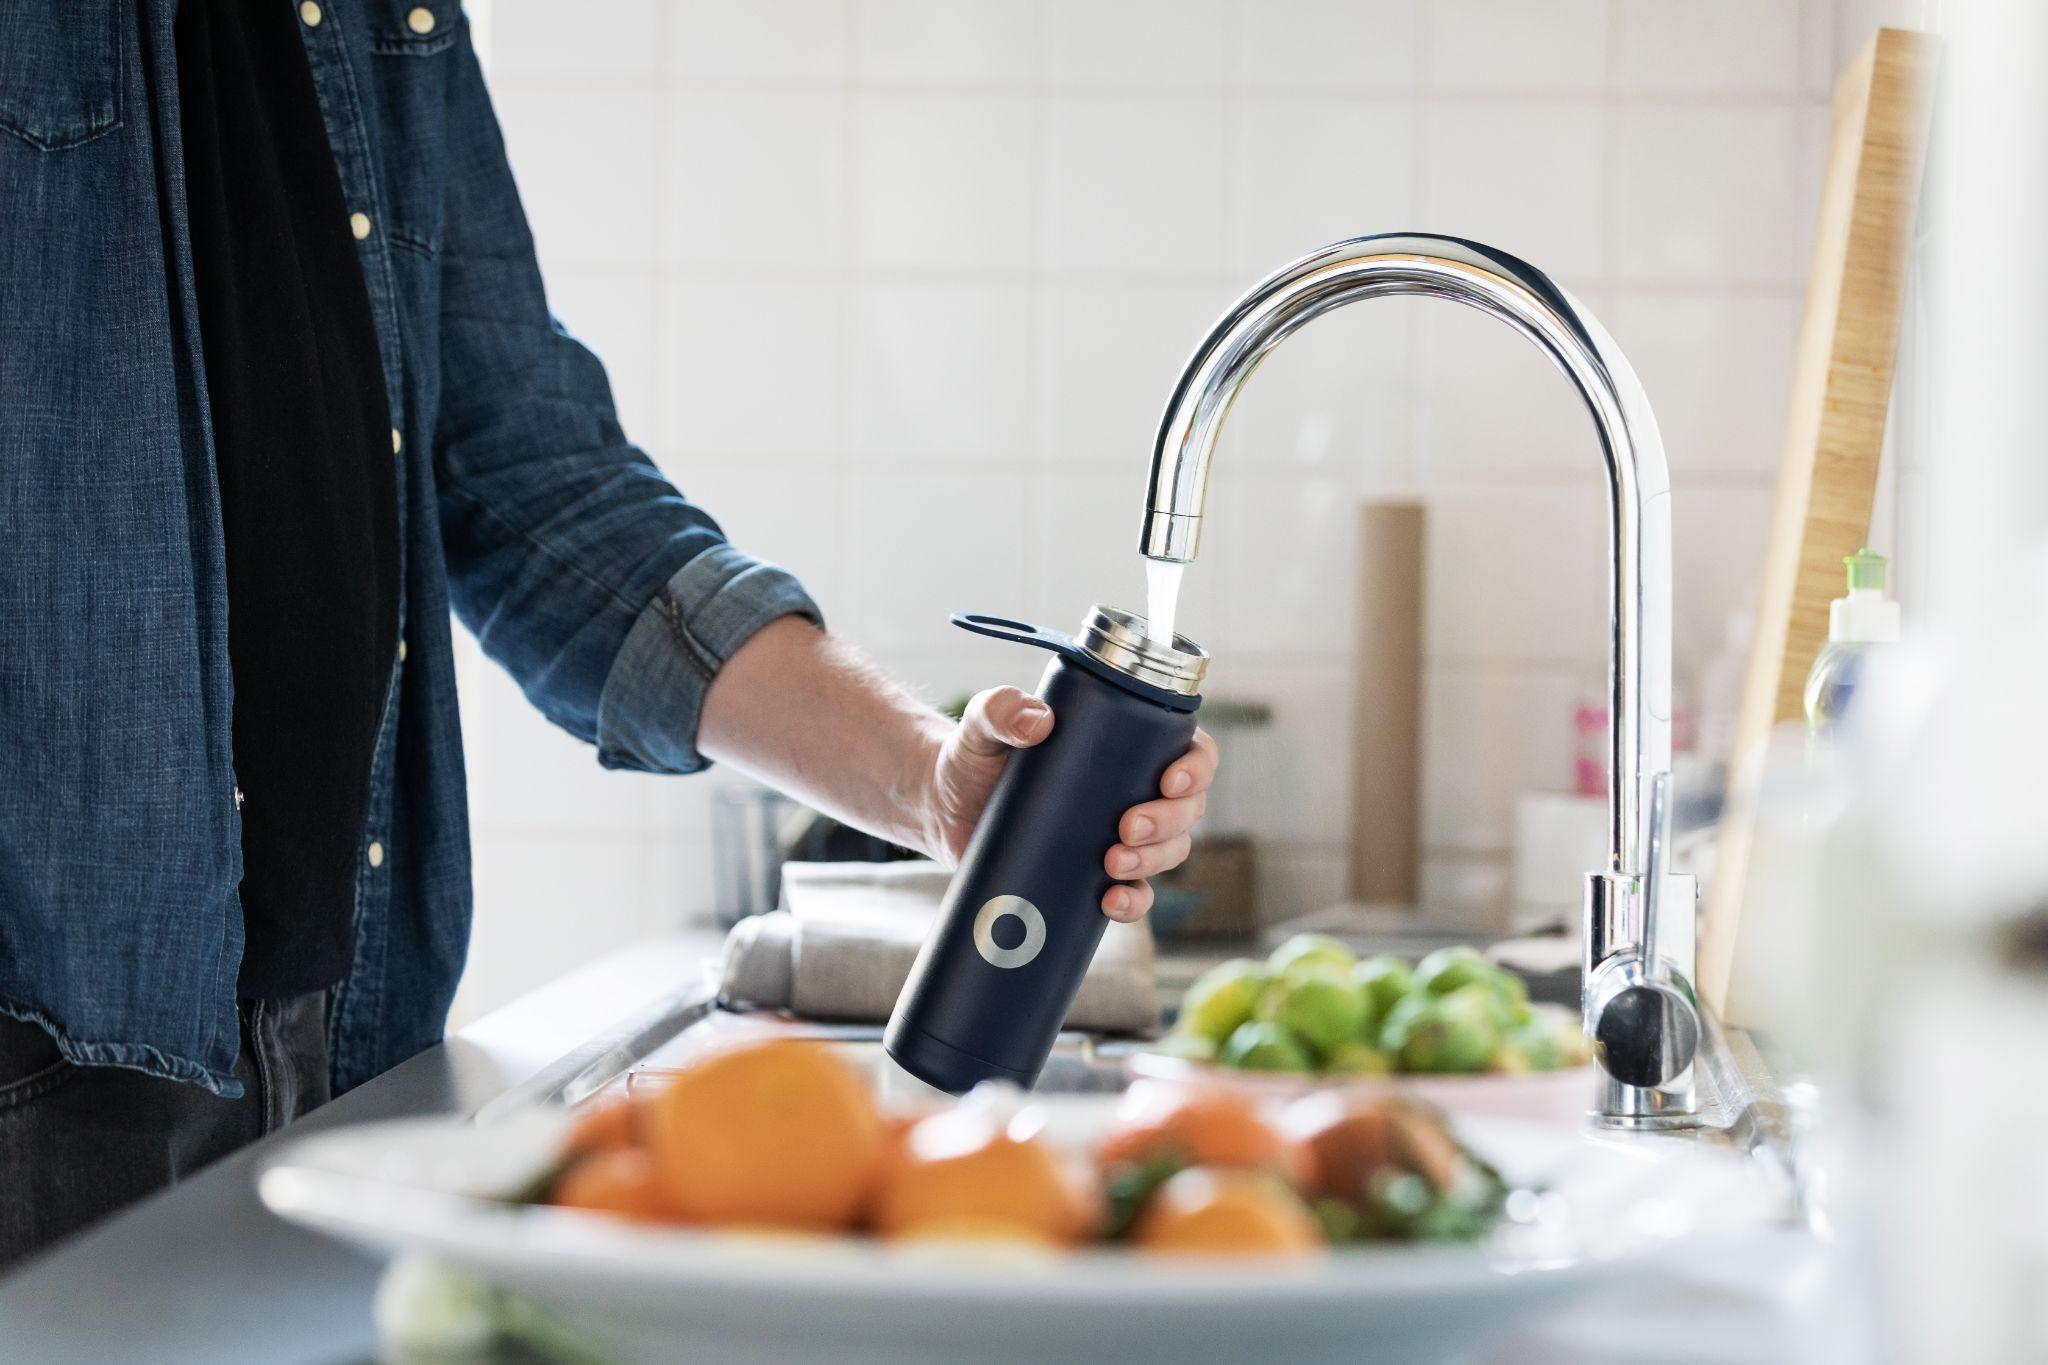 A man is holding a water bottle in front of a kitchen sink.